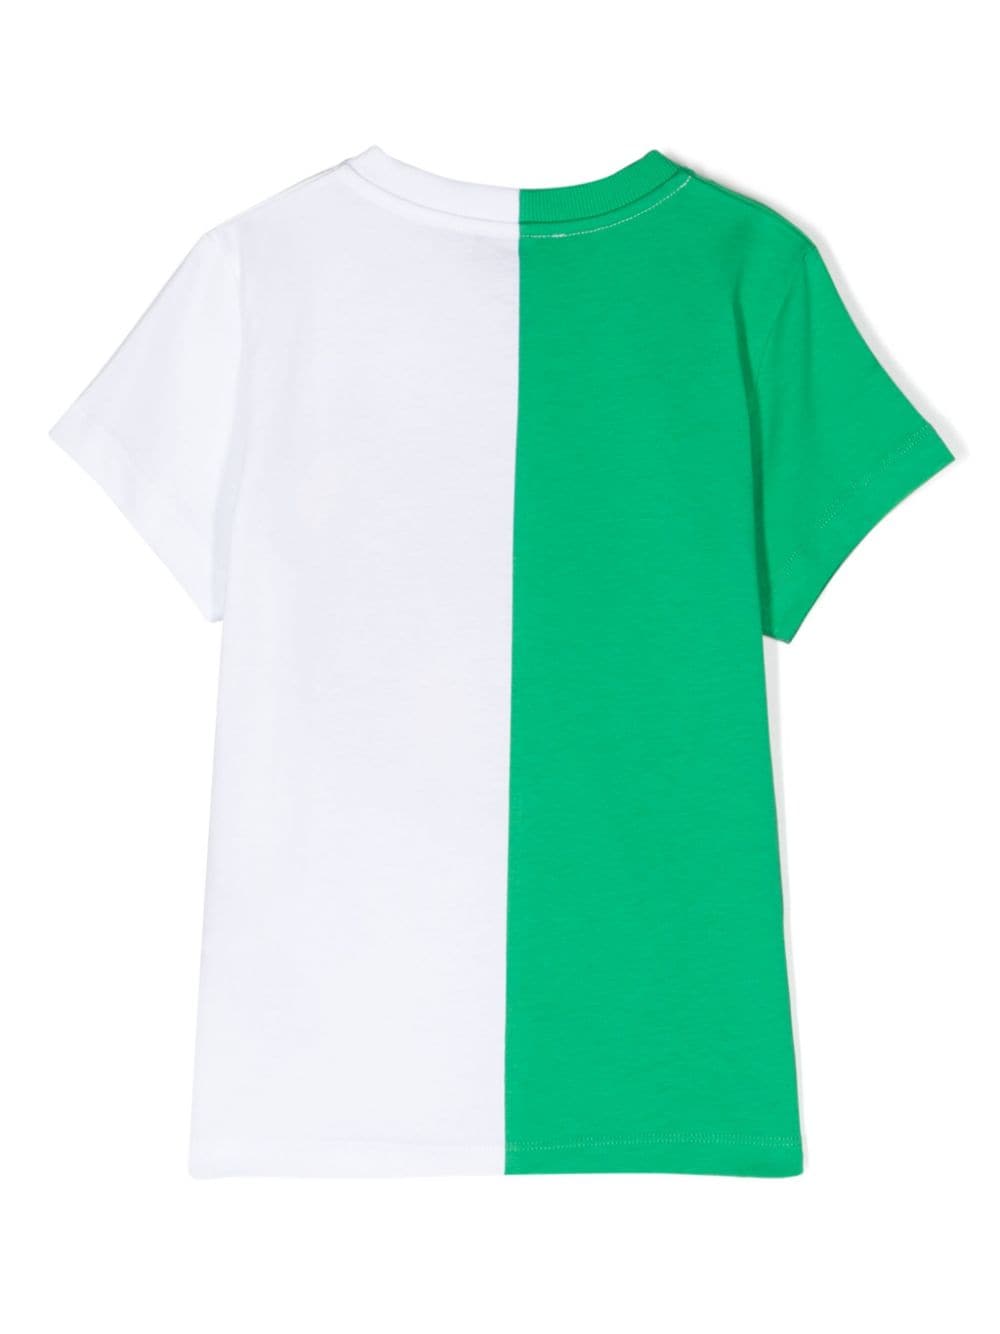 White and green t-shirt for children with logo